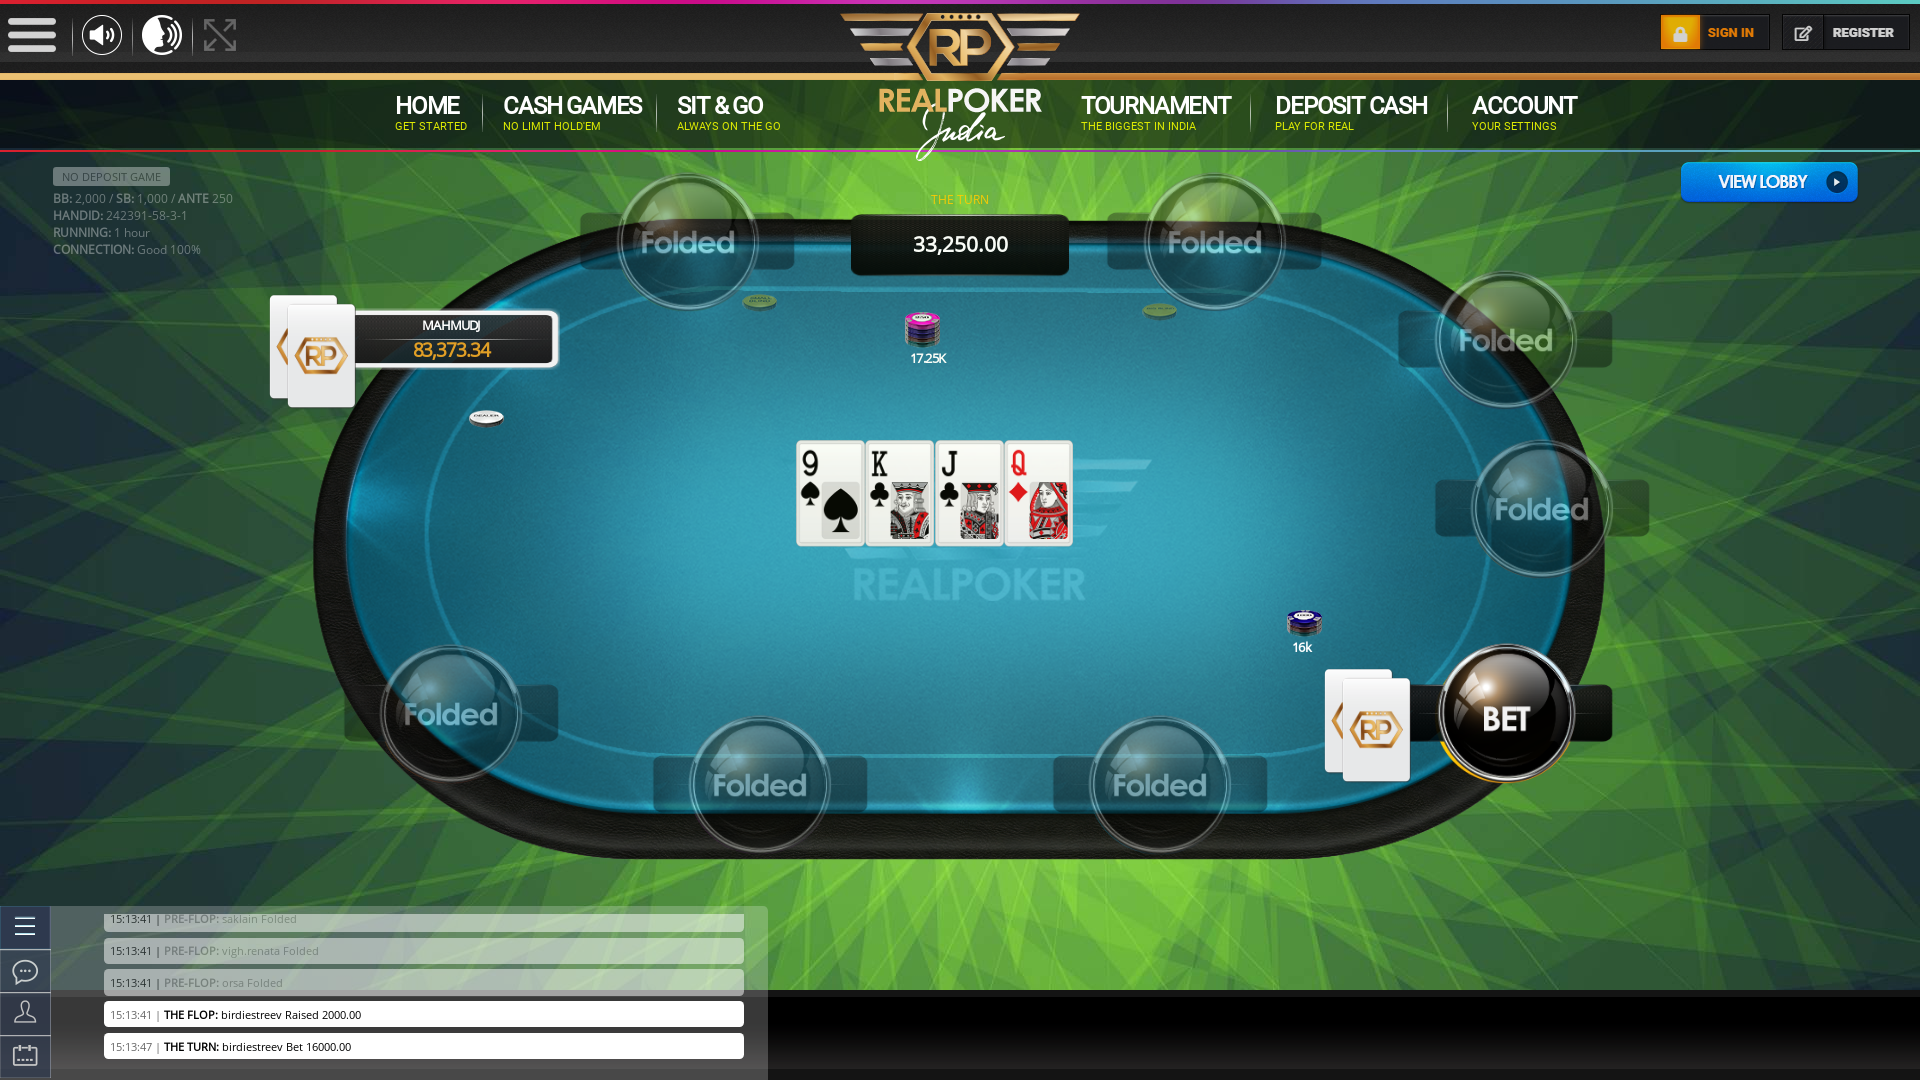 10 player poker in the 65th minute